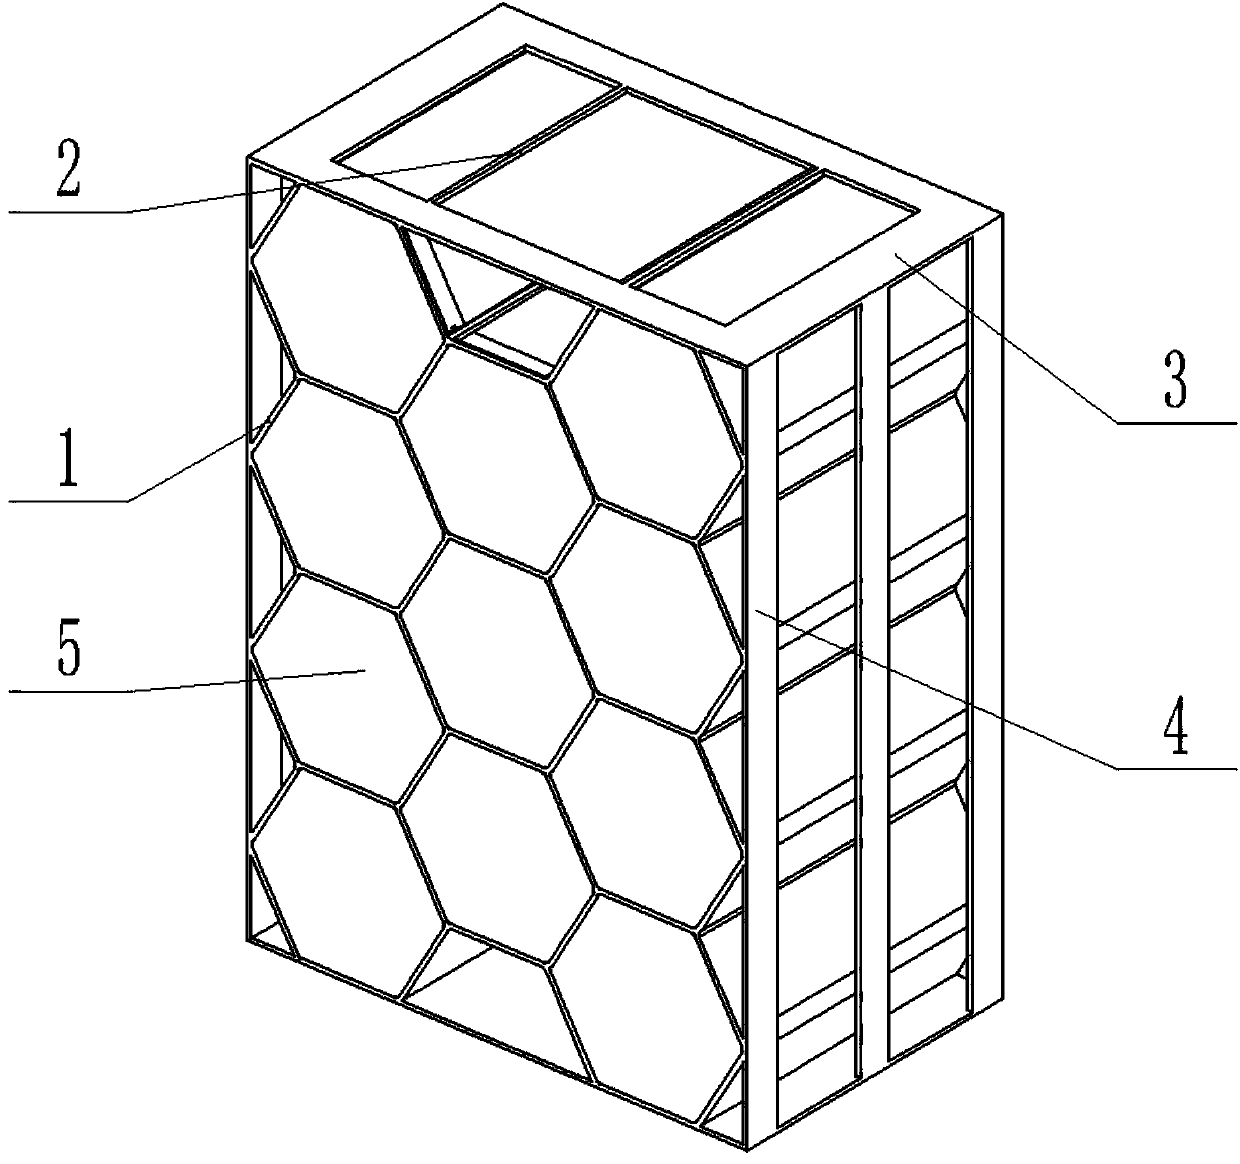 Modular honeycomb building capable of being assembled quickly